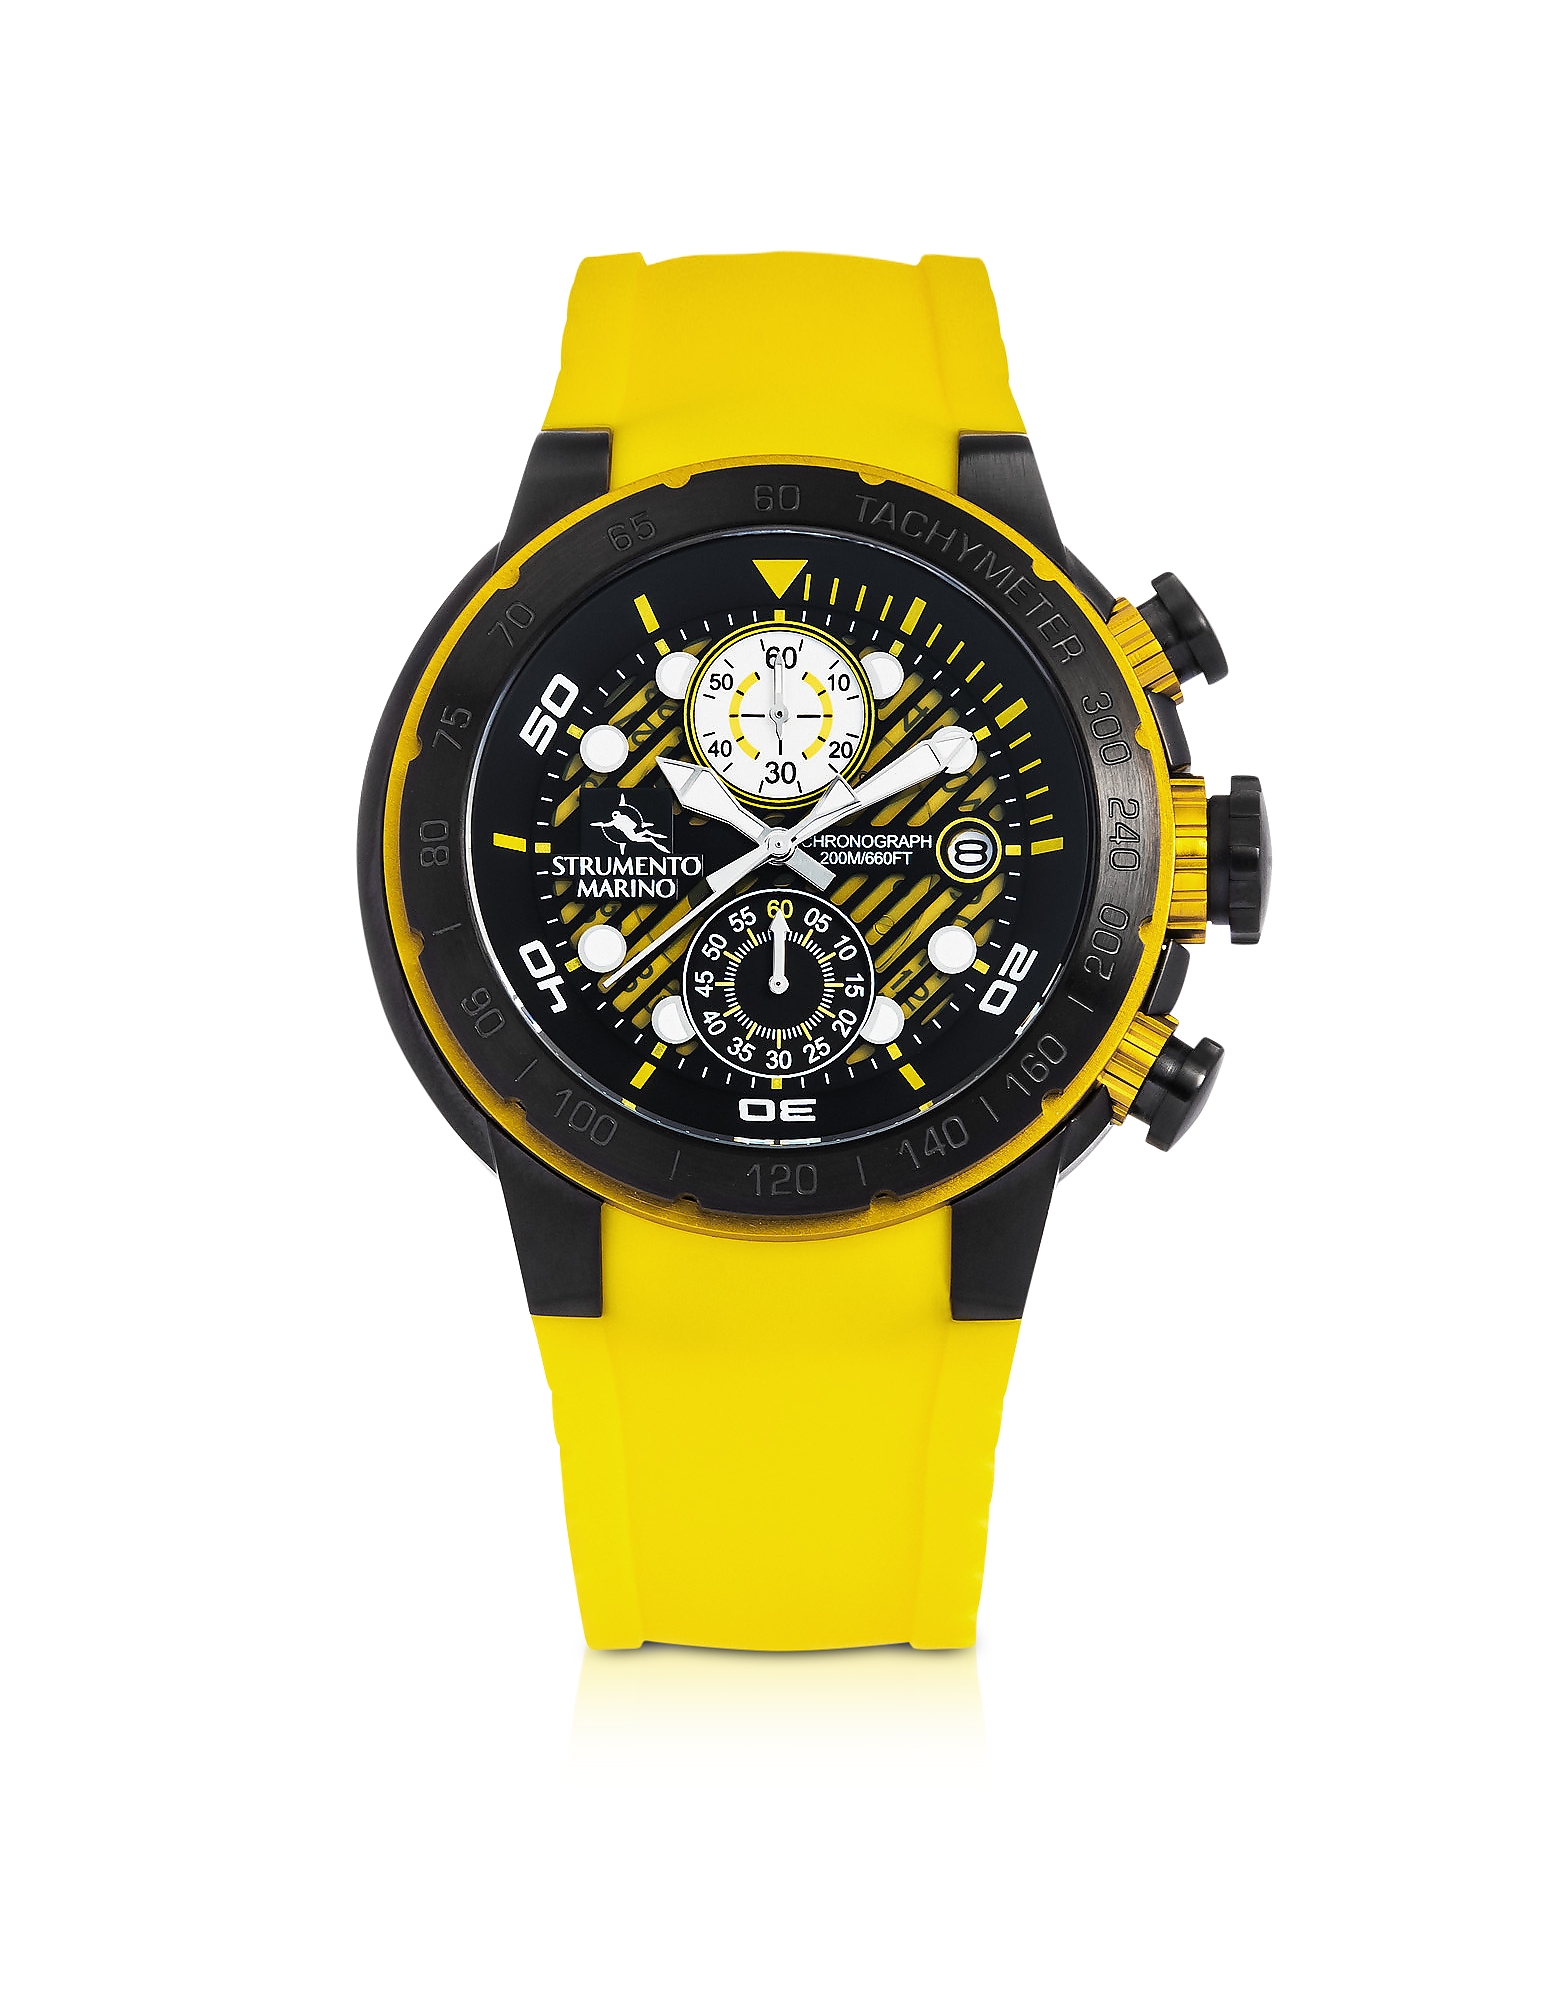 

Saint-Tropez Black Stainless Steel Men's Chronograph Watch w/Yellow Silicone Band